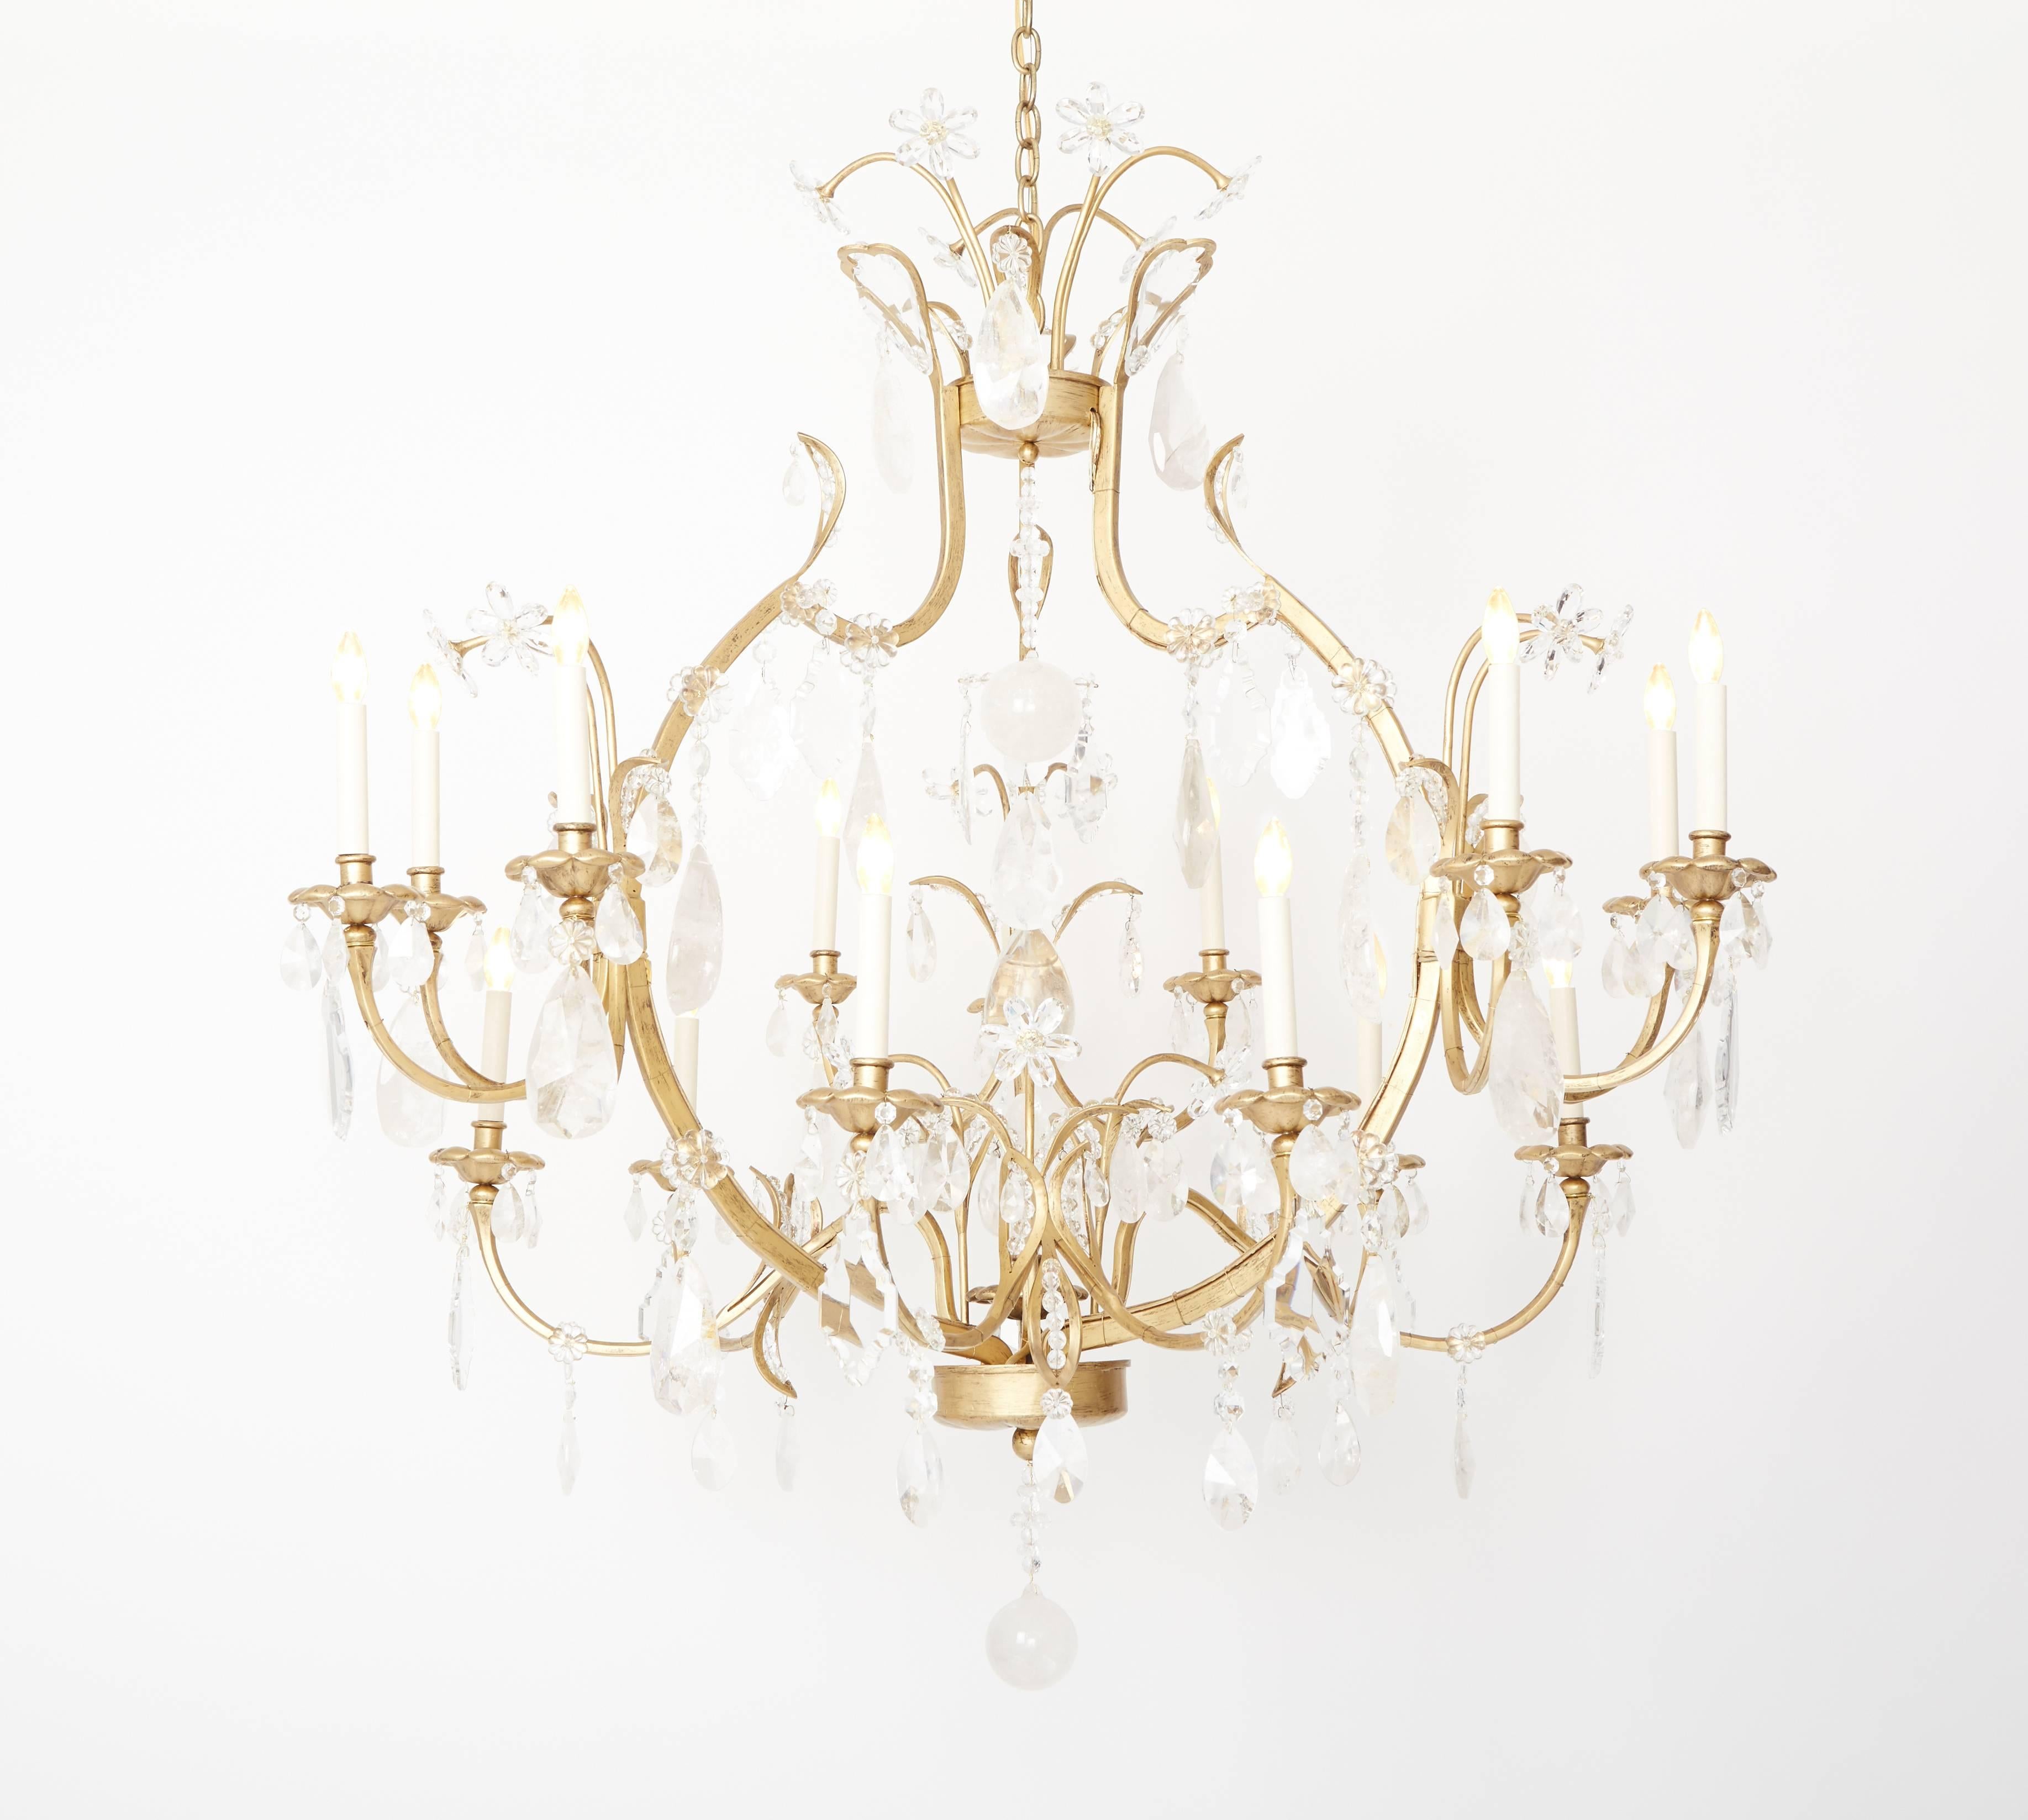 A custom 15 light gilt brass cage form Louis XV style chandelier, the arms of staggered height issuing from frame draped with rock crystal and faceted crystal drops. The center with stems of flowers with inset crystal beaded petals. The frame having